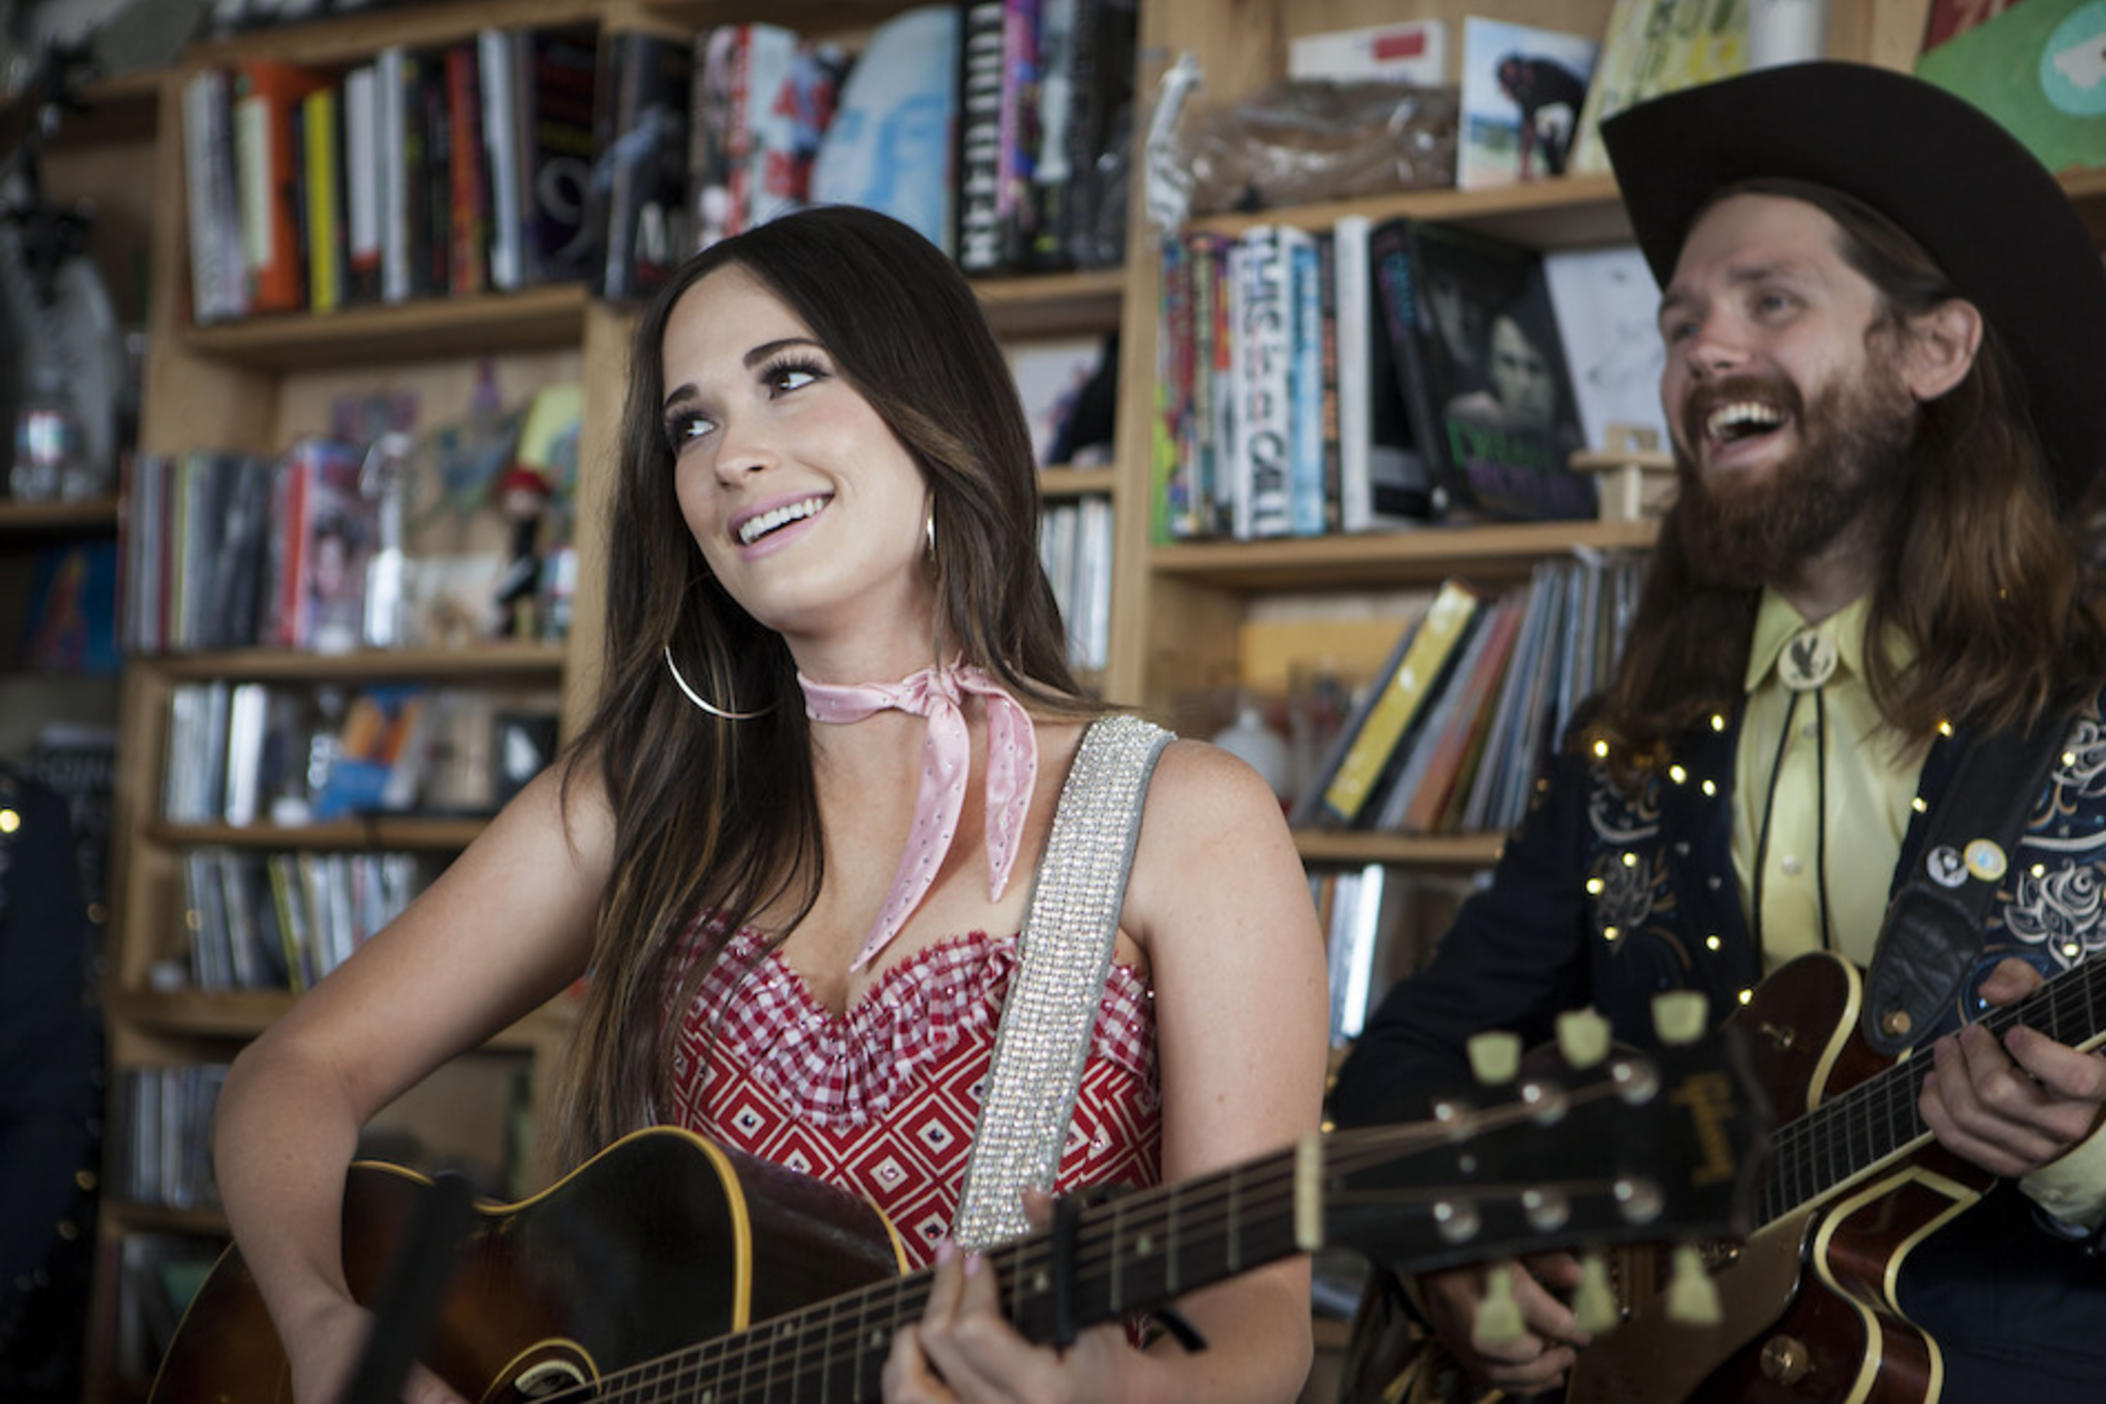 Kacey Musgraves performs NPR's Tiny Desk Concert in 2015